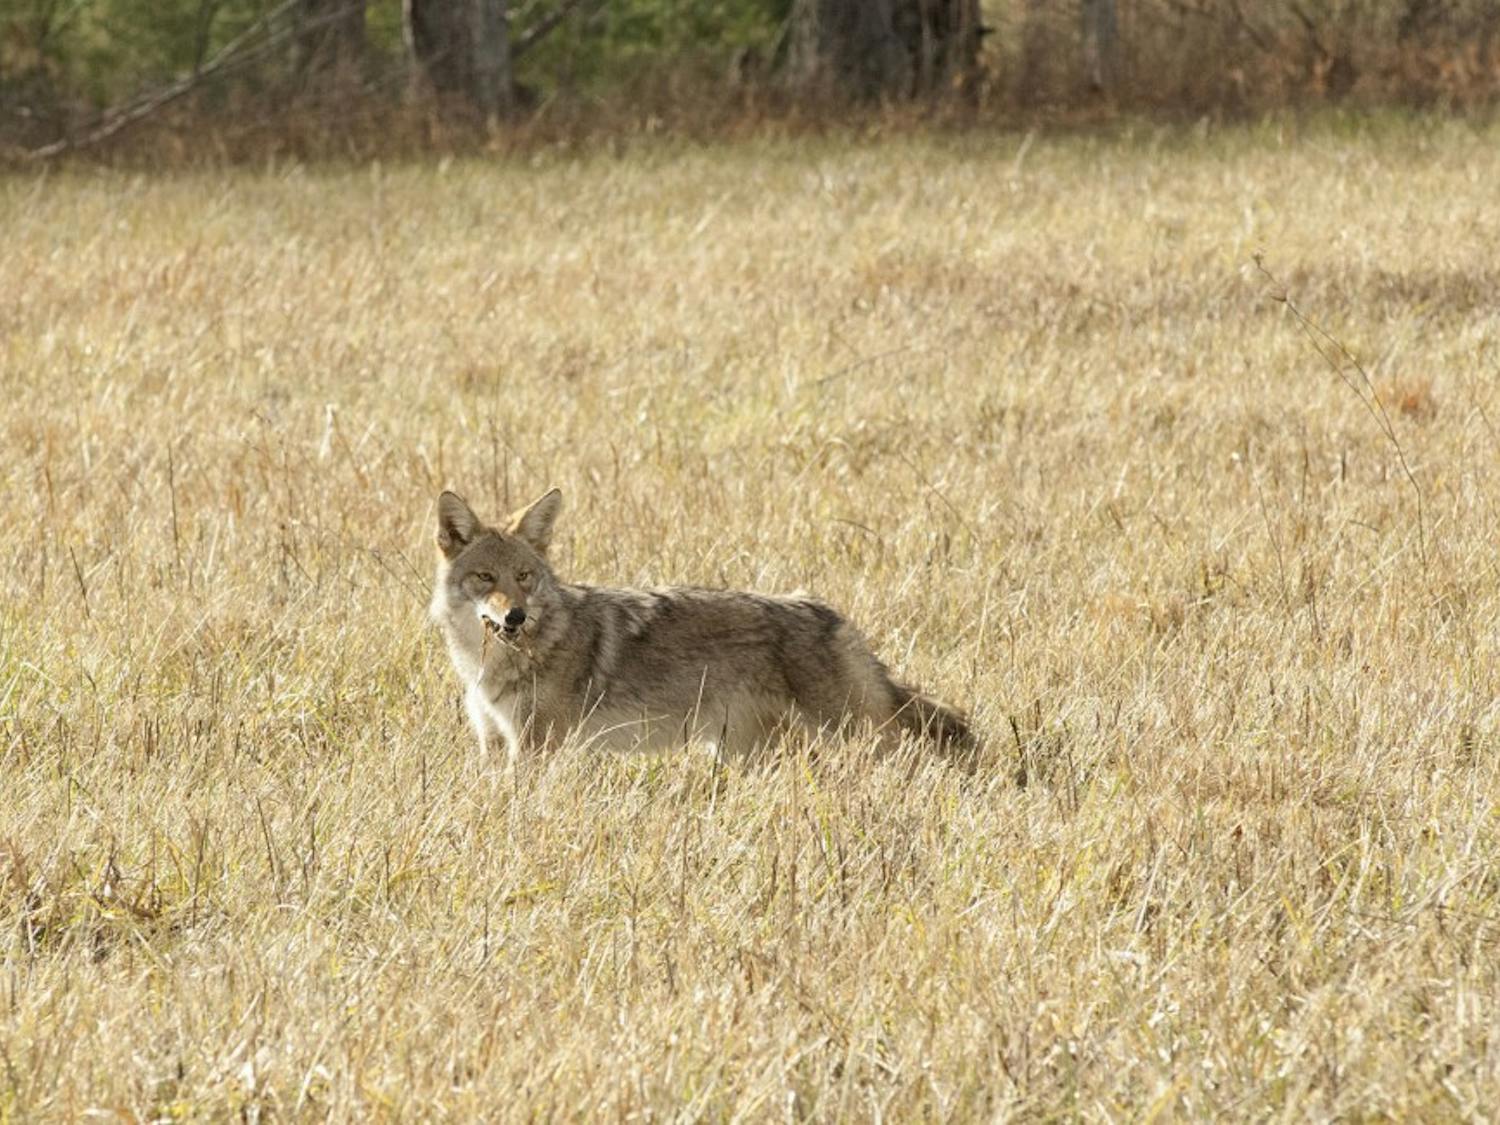 Coyote hunting in a field in Cades Cove. Photo courtesy of Missy McGaw.